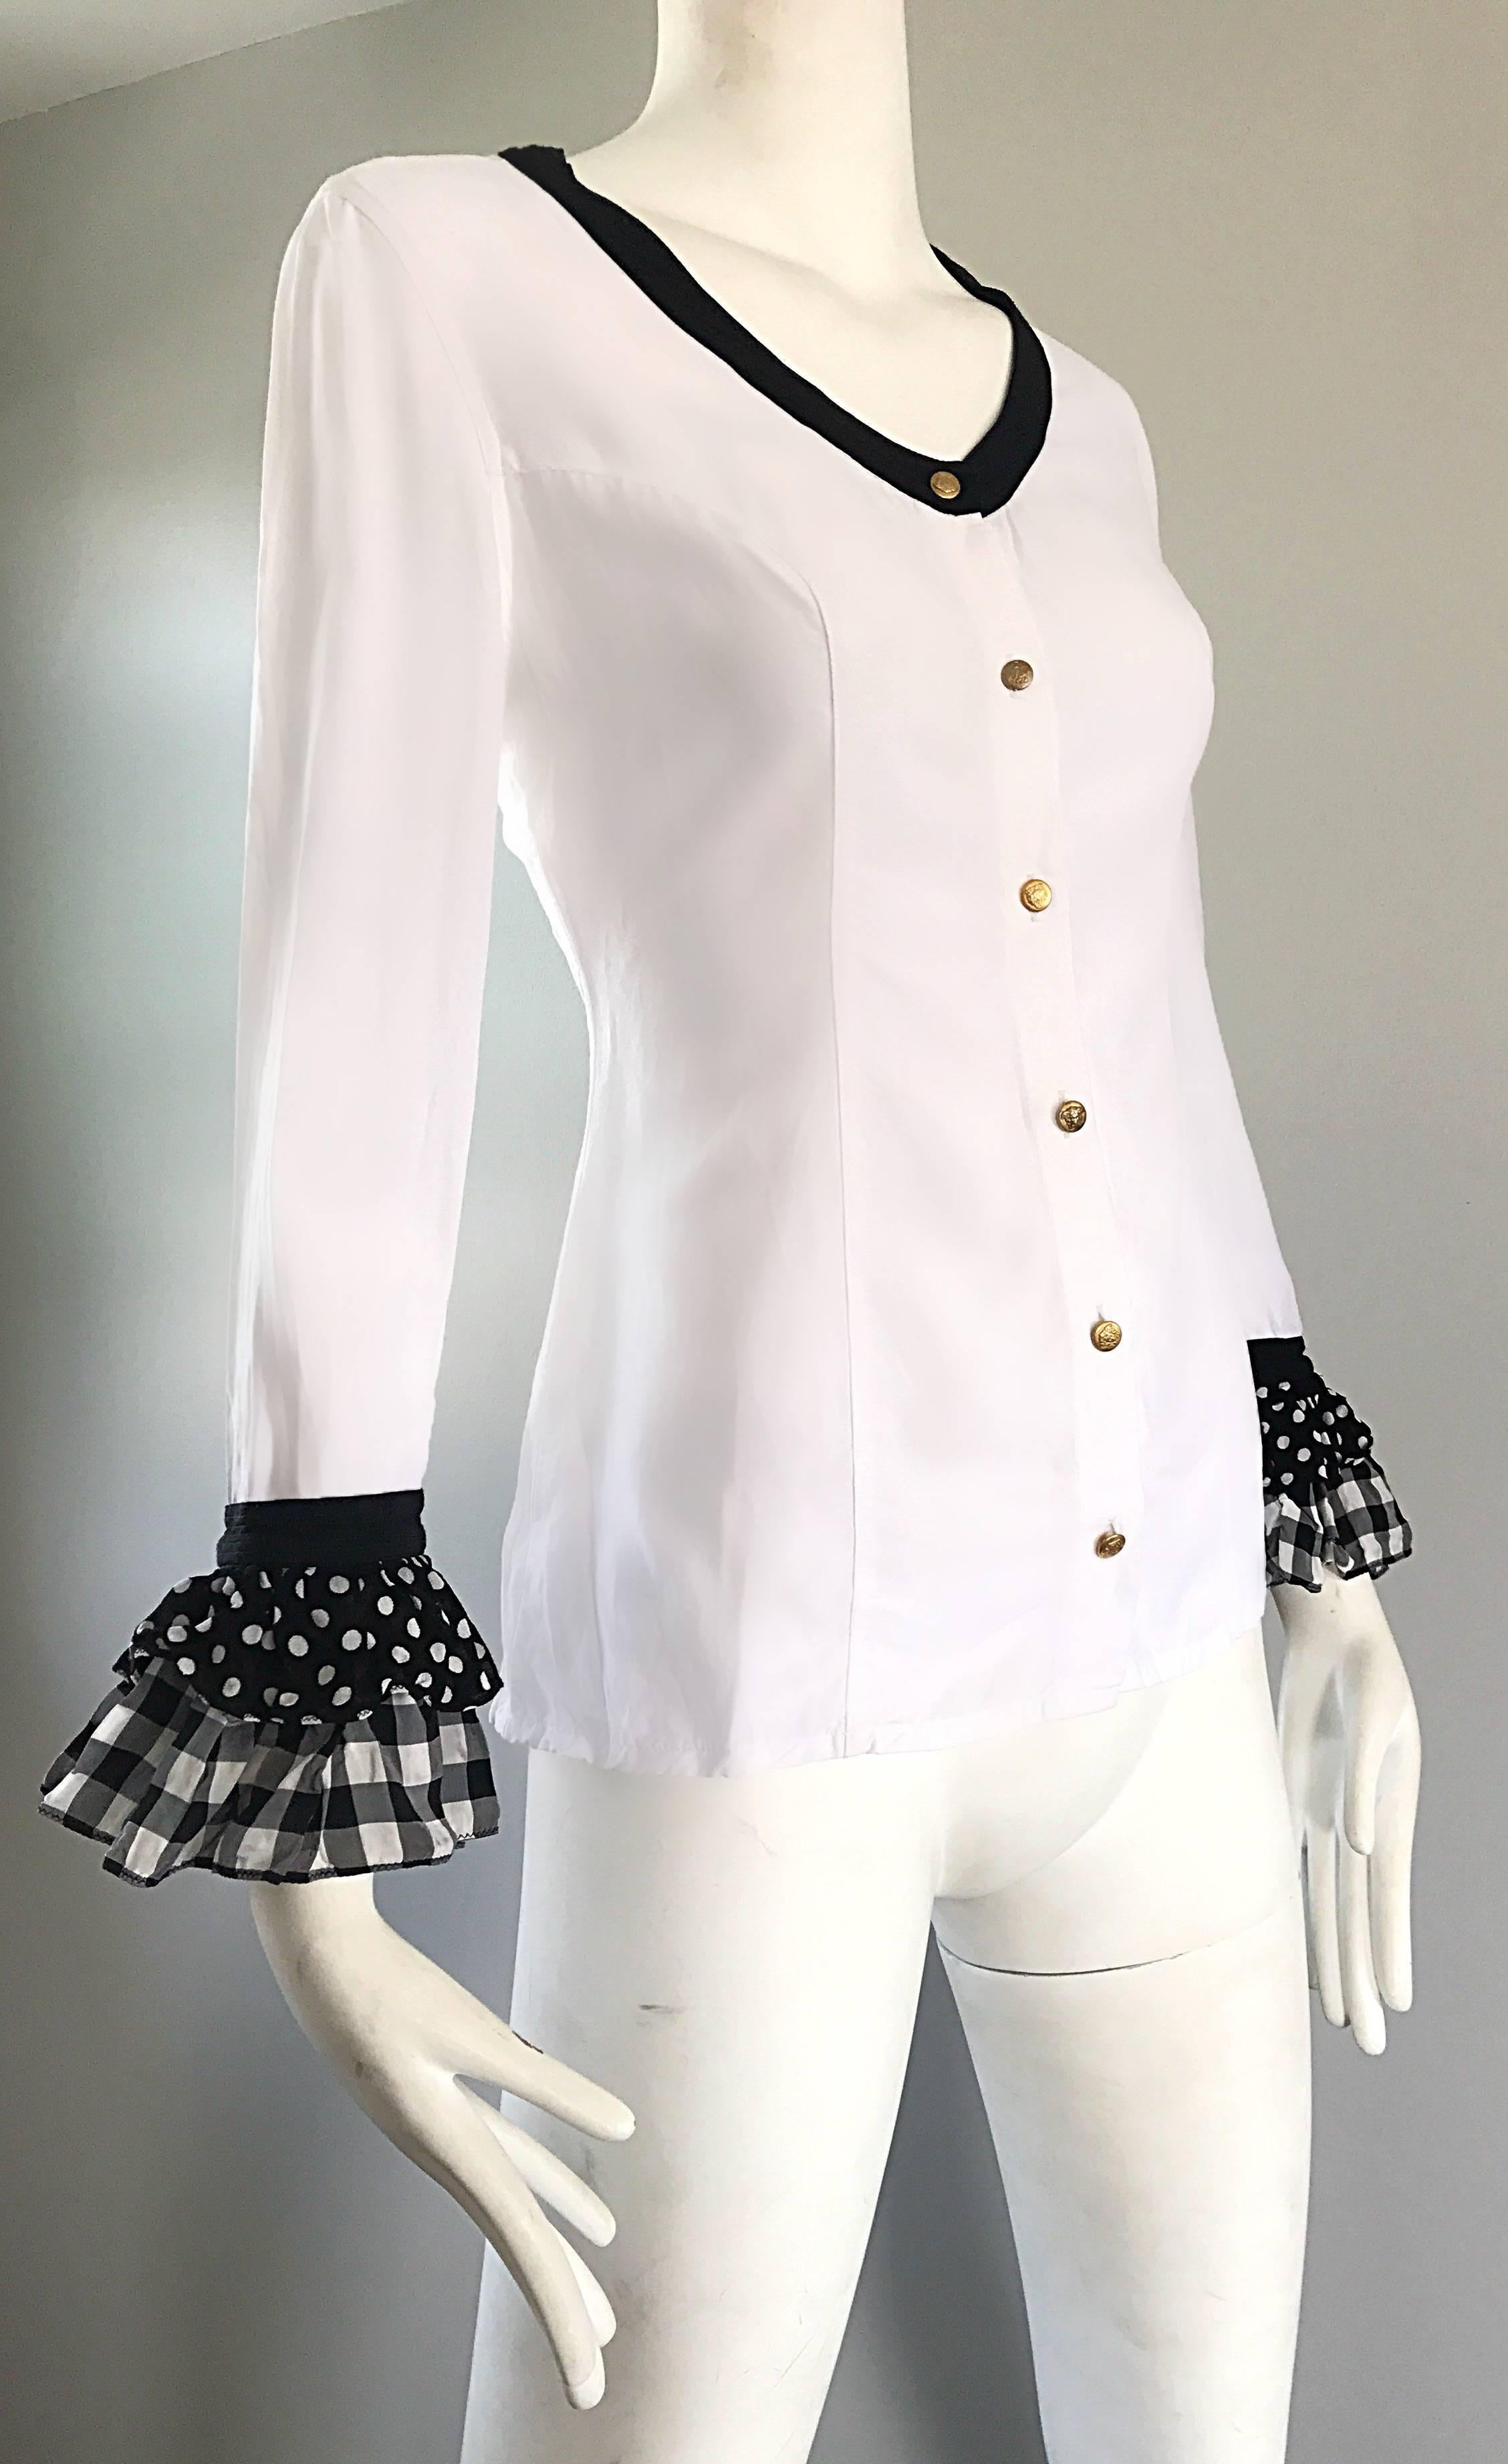 Vintage Gianni Versace 1990s Black and White Polka Dot Plaid 90s Blouse Top Rare For Sale 1